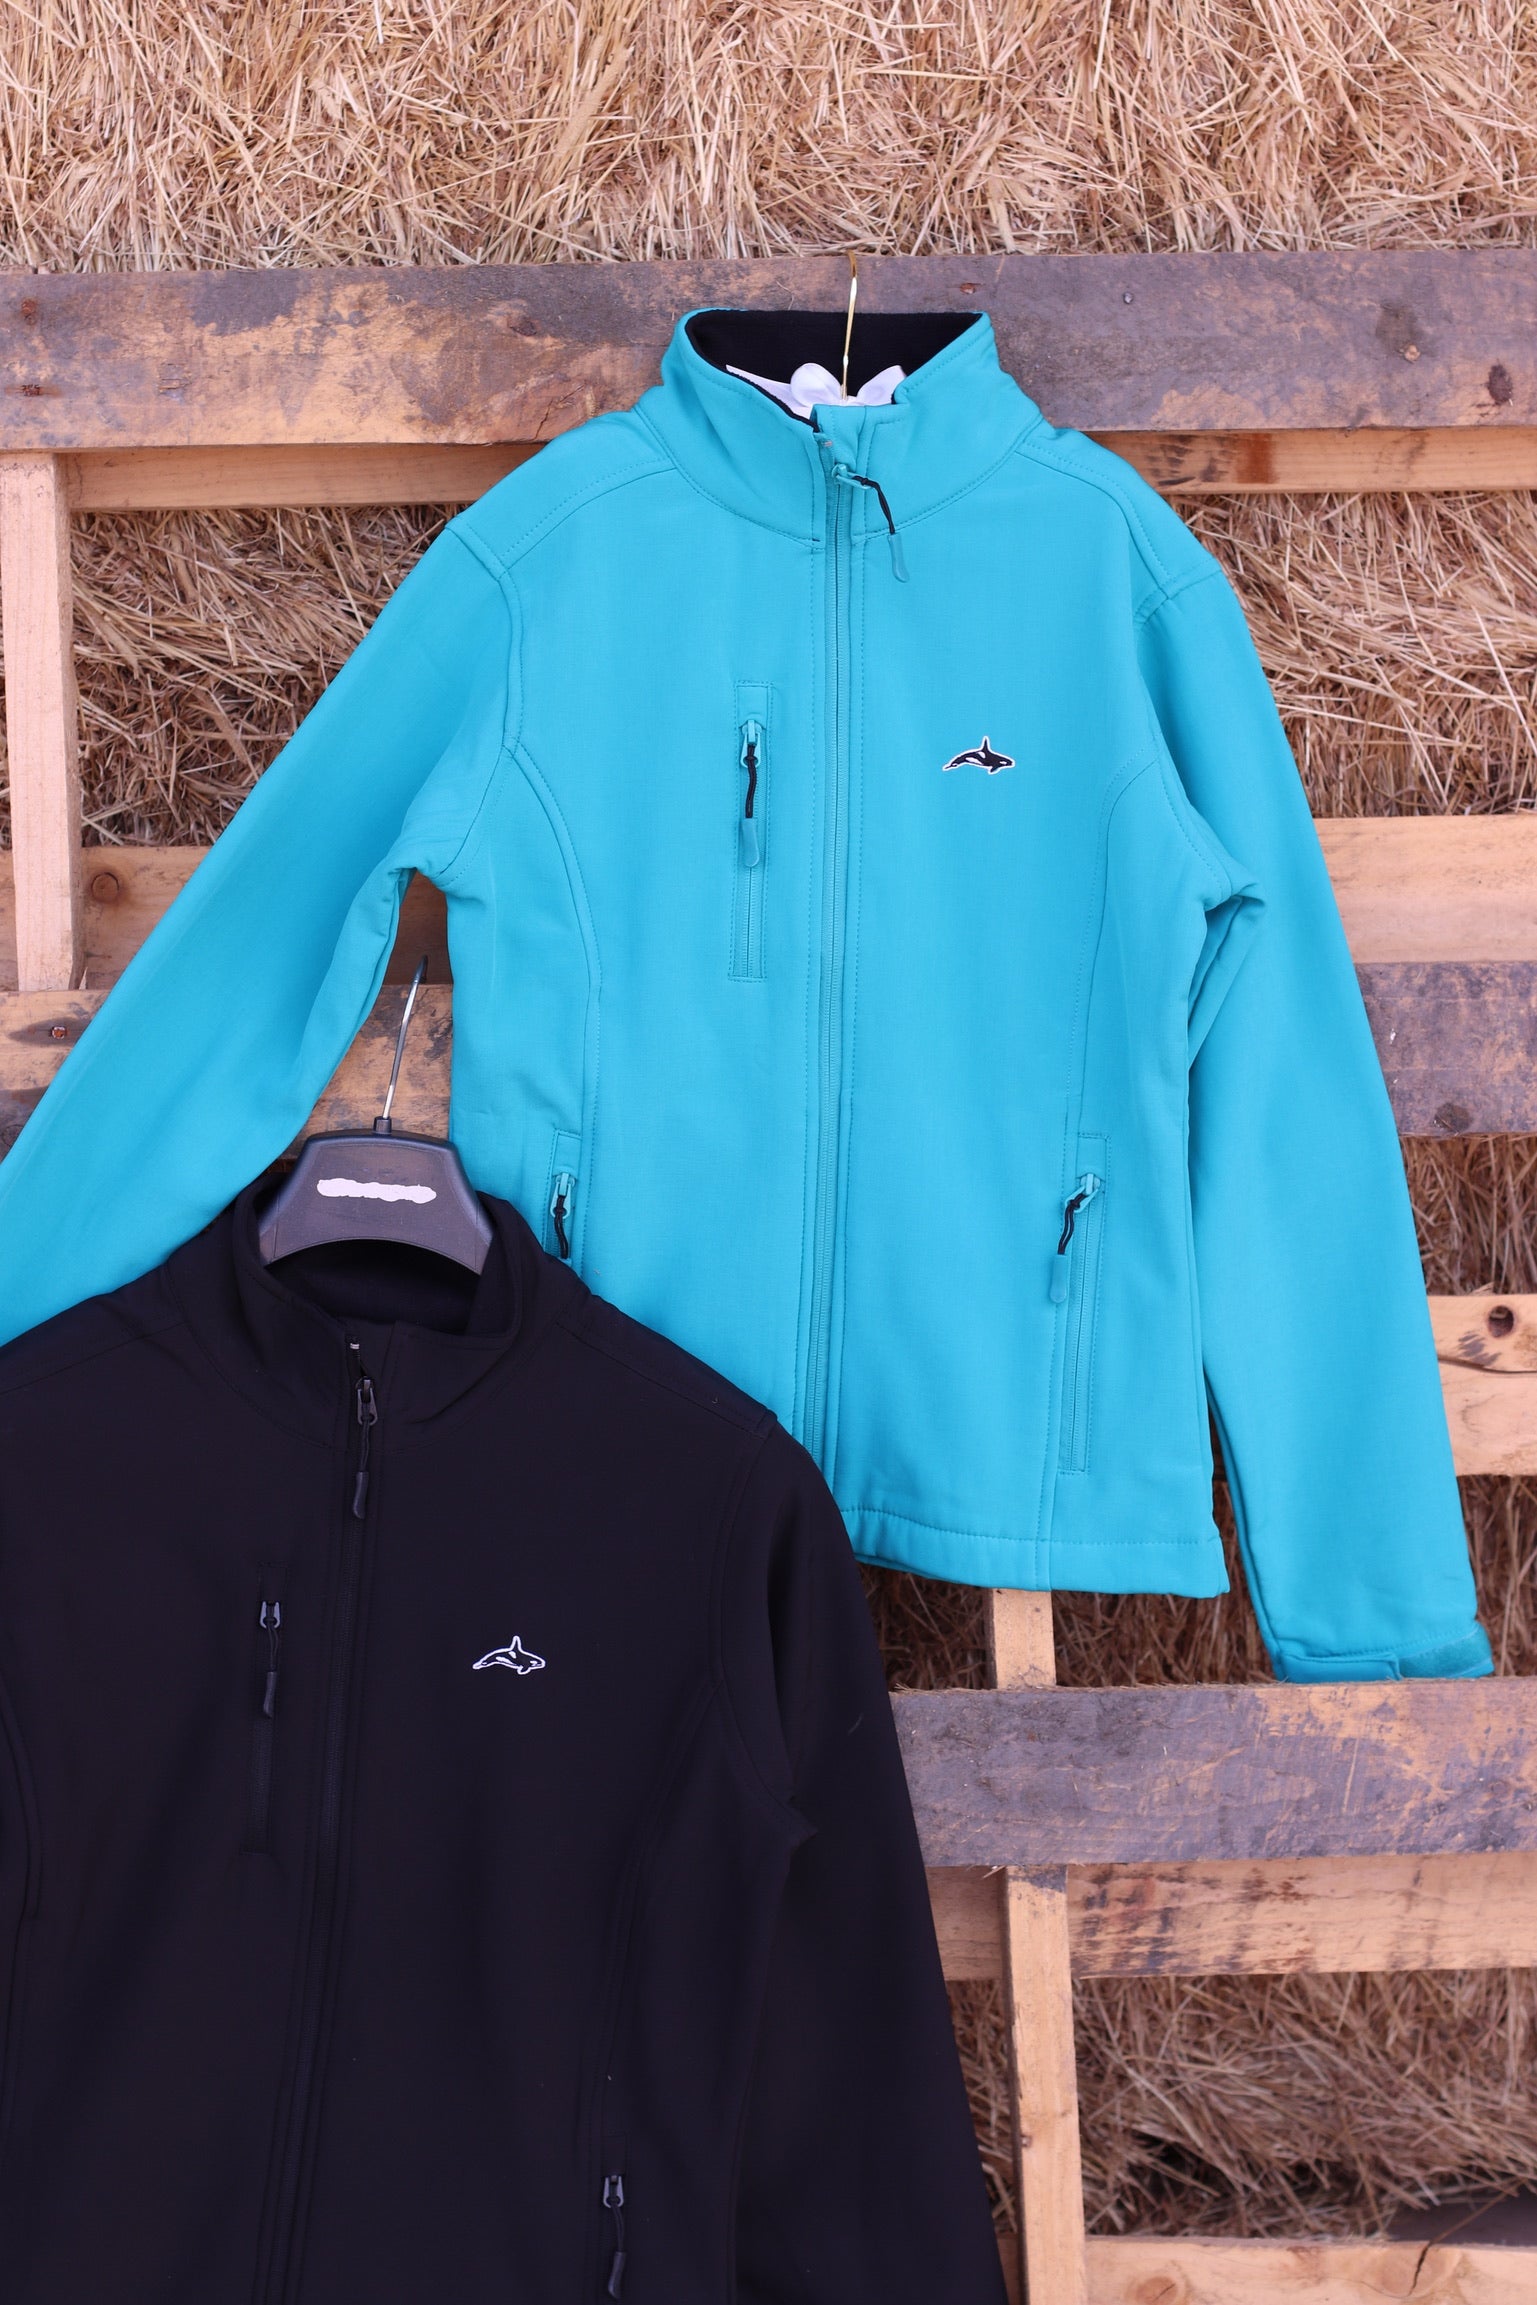 Softshell Jackets: An Essential Gear for Outdoors